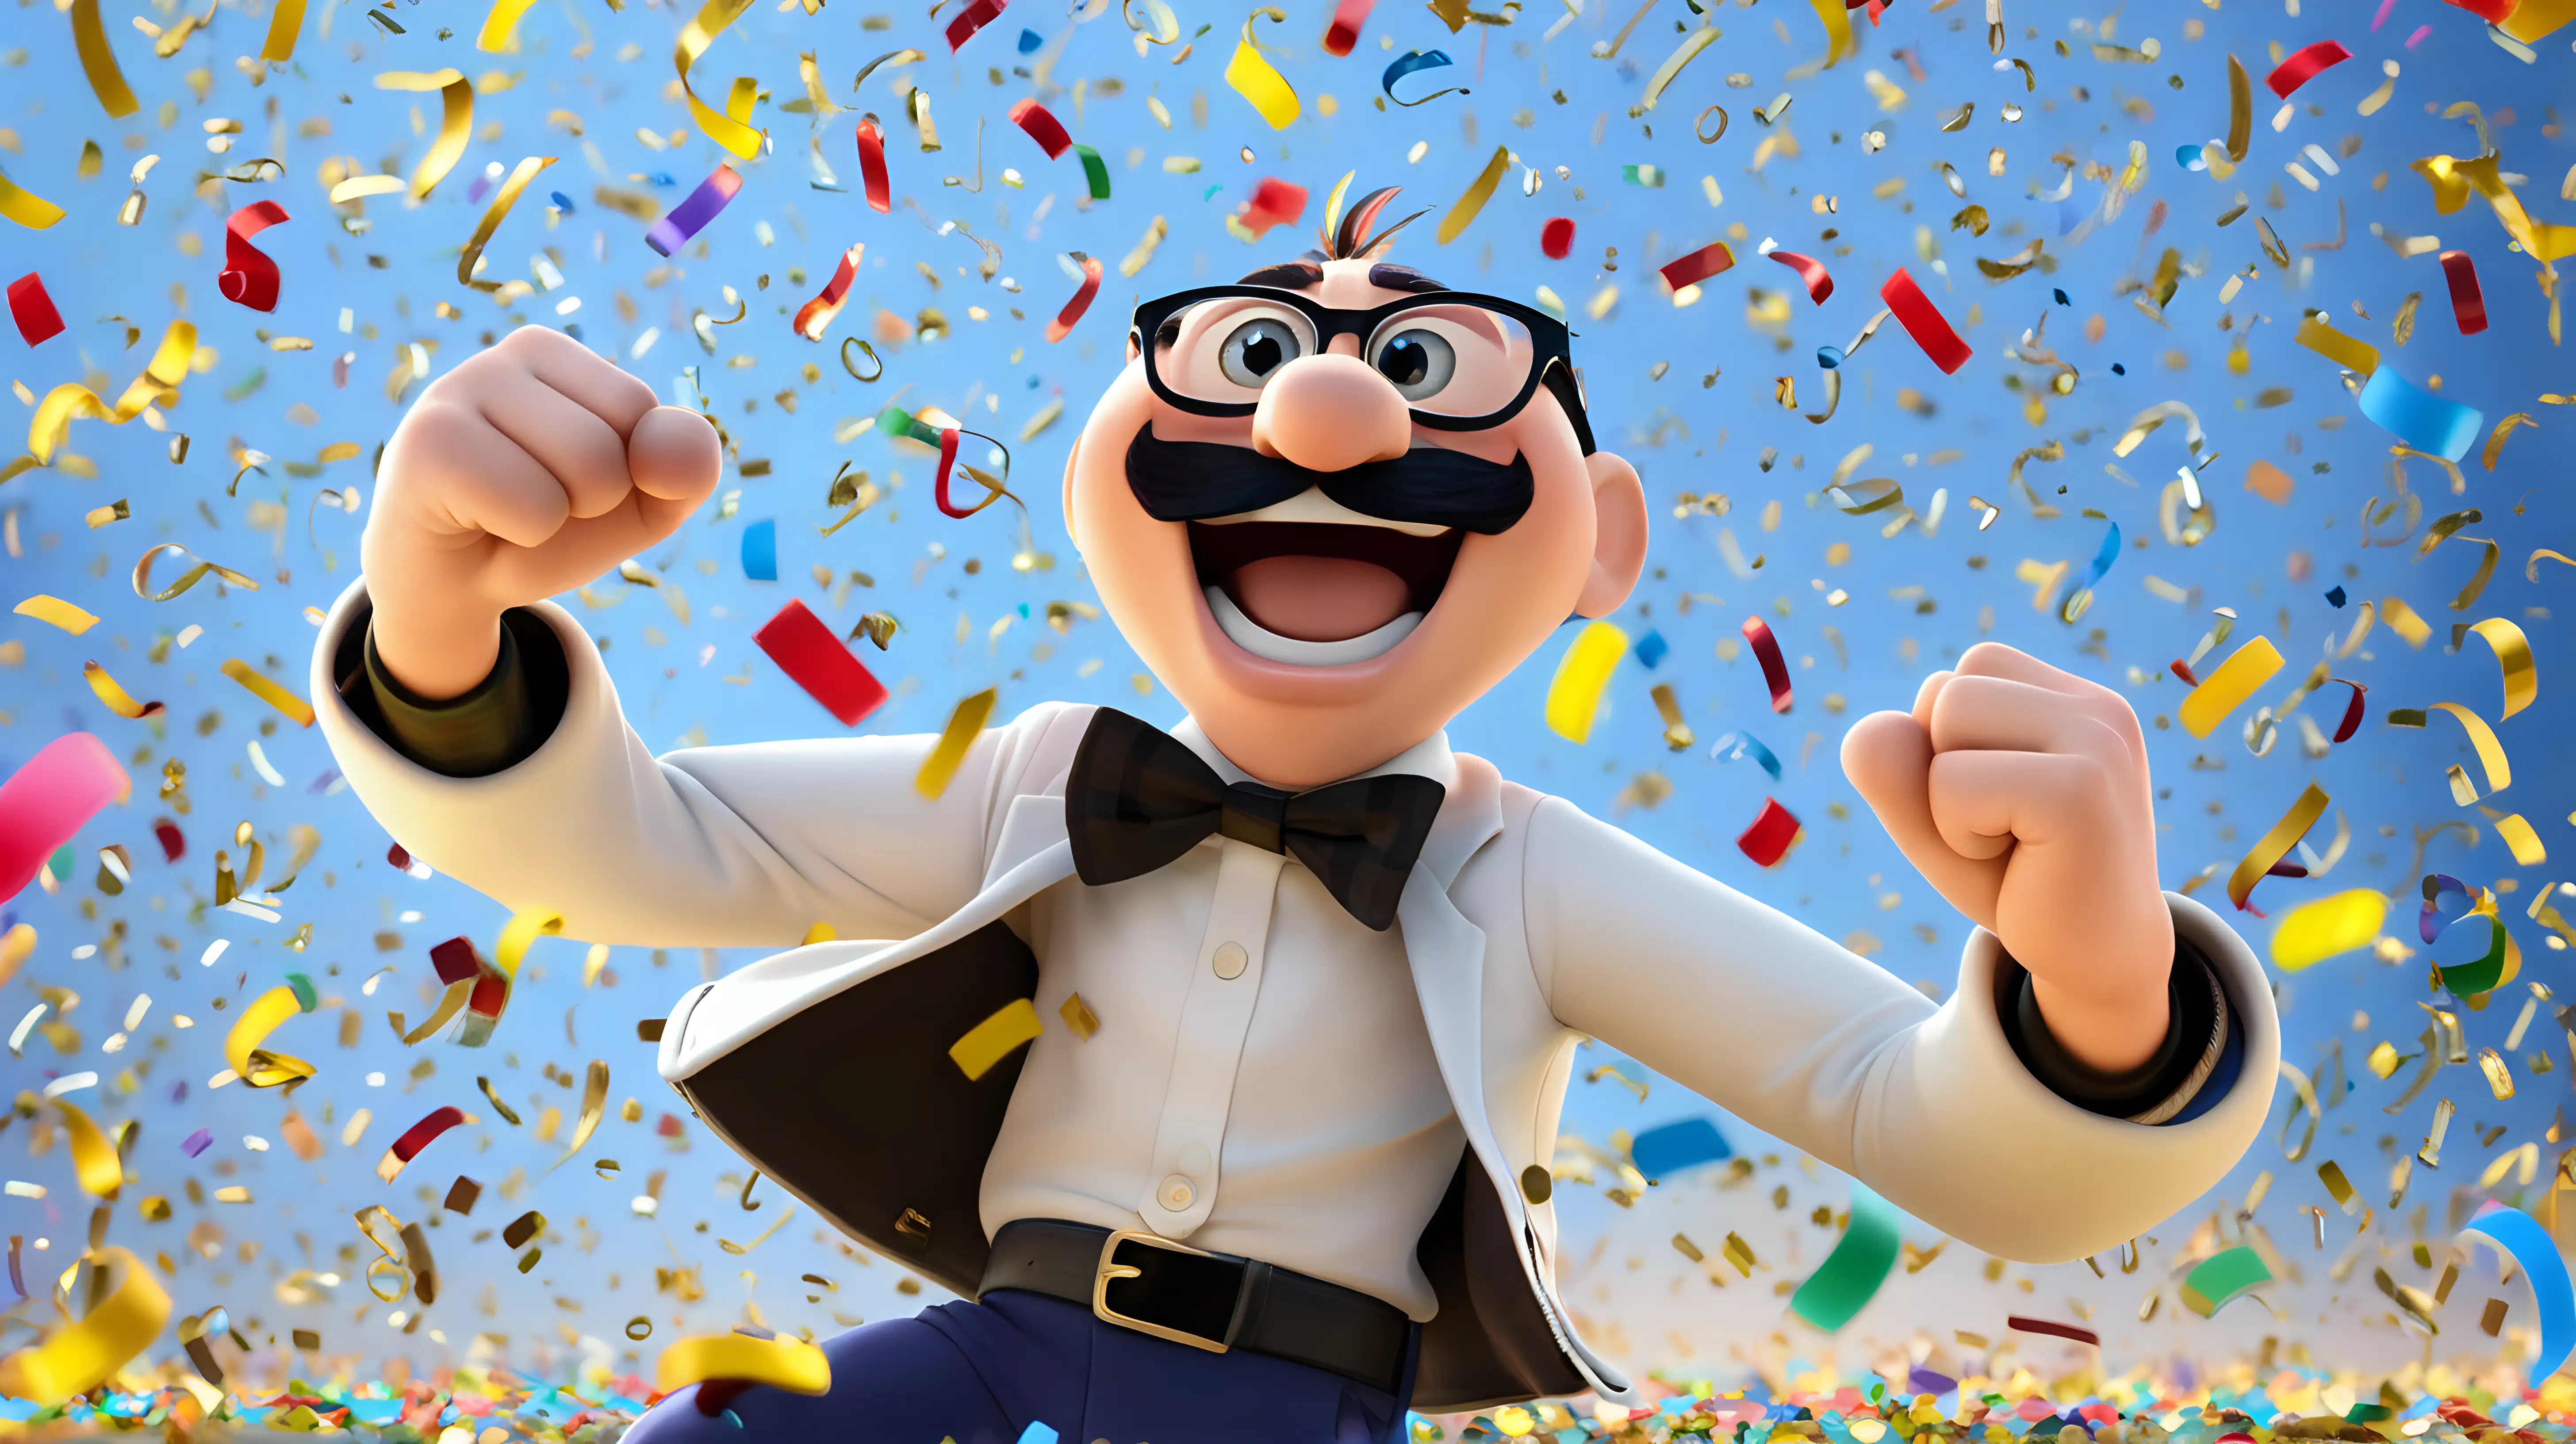 An animated character doing a celebratory dance with confetti falling around them.